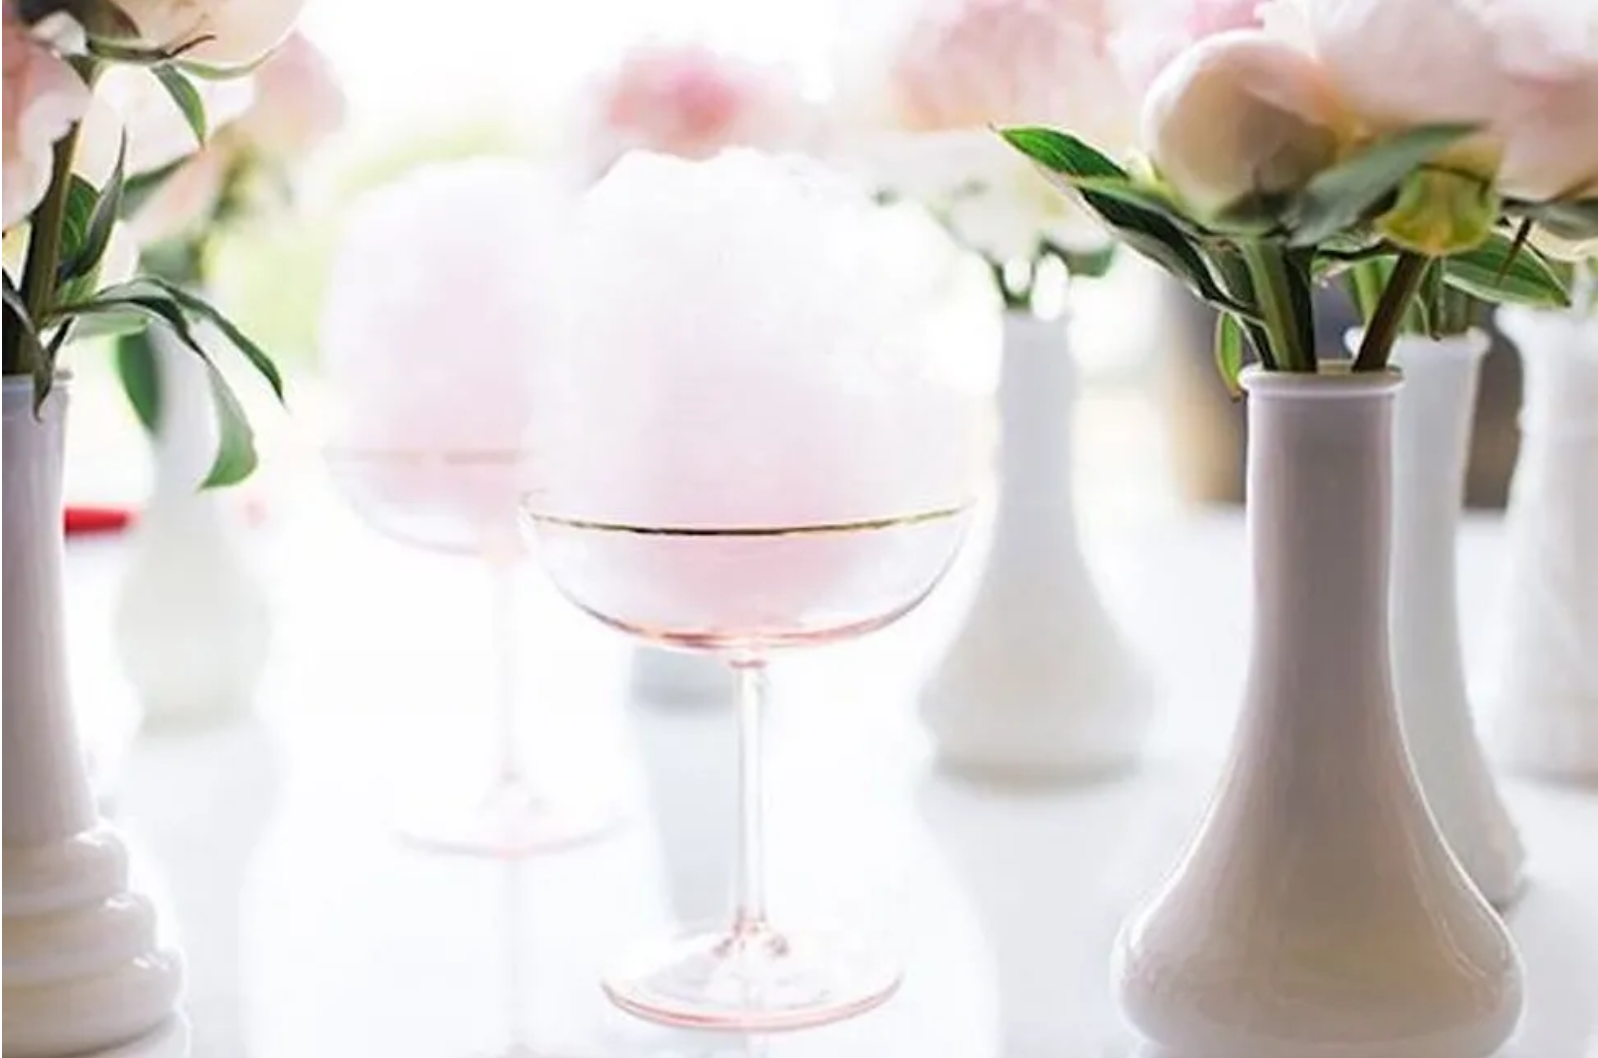 Toast To Friendship With These Sweet Galentine's Day Cocktails